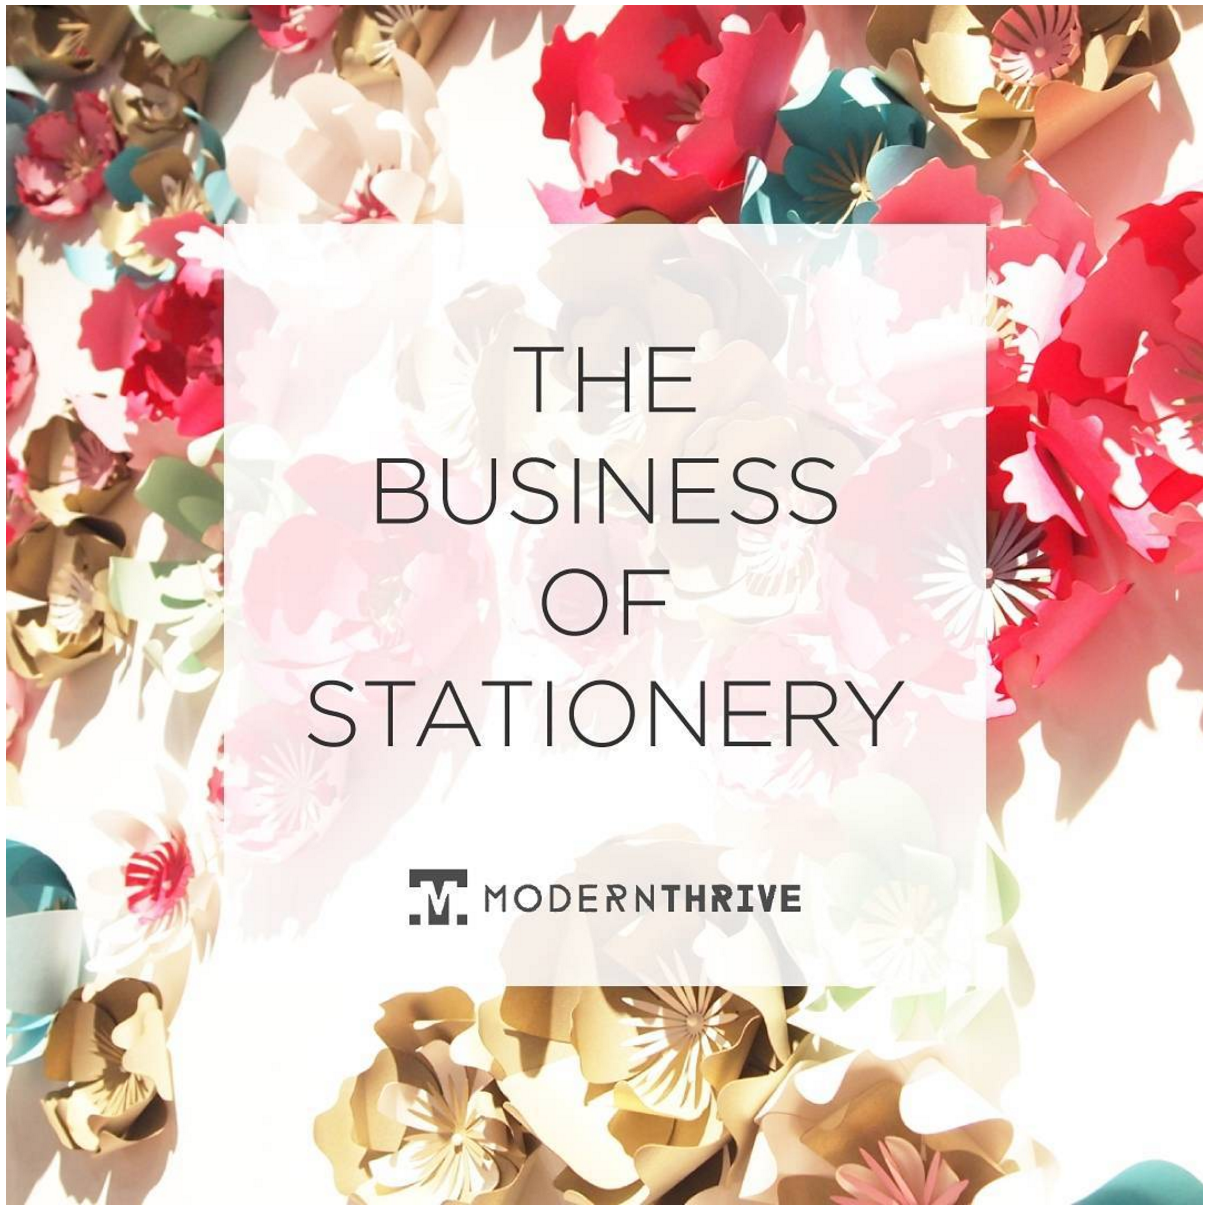 The Business of Stationery / Alexis Mattox Design via Oh So Beautiful Paper